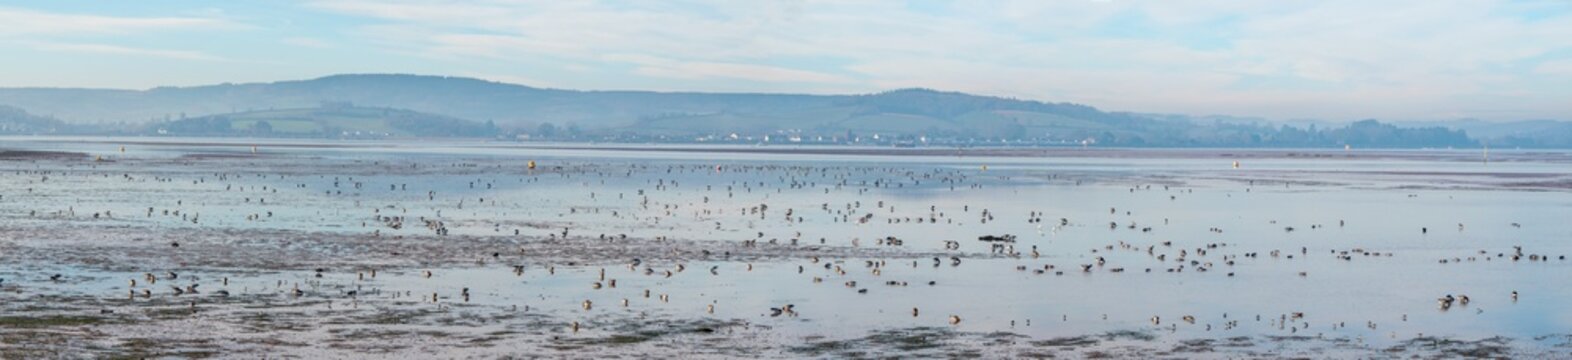 Exmouth estuary panoramic image showing hundreds of birds in the foreground. Slim letterbox format image.